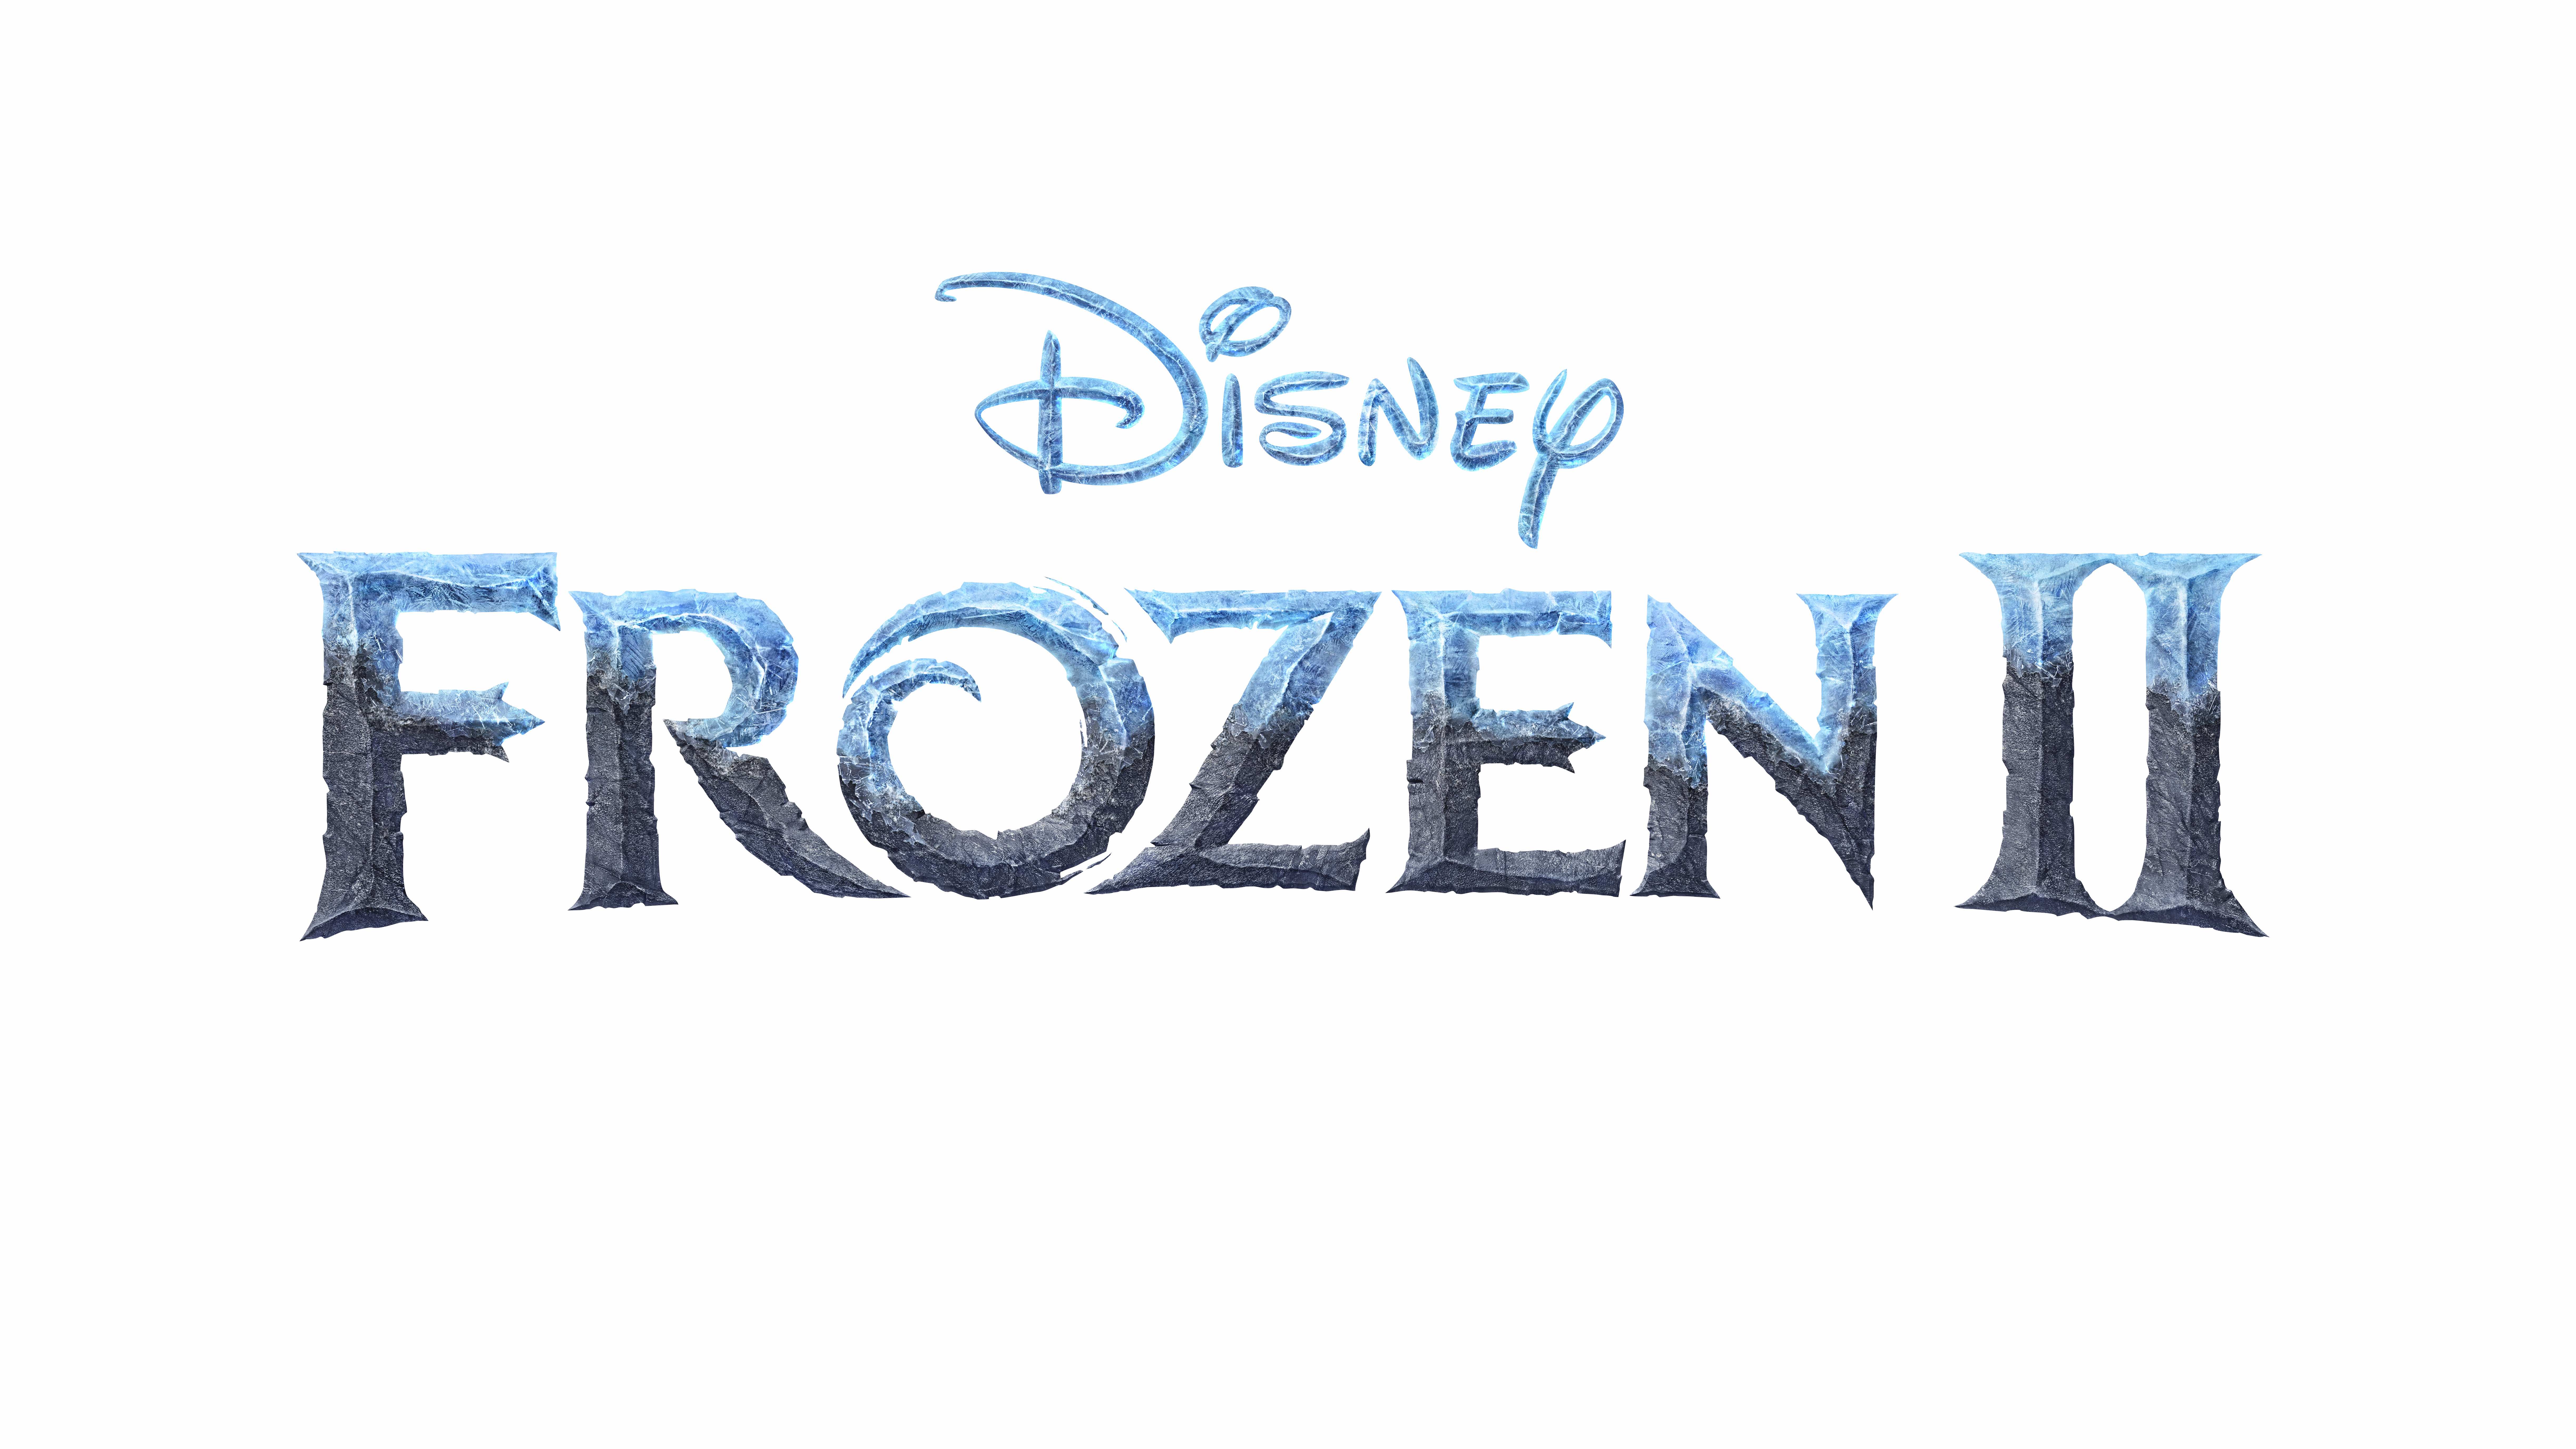 Behind The Scenes Of Frozen 2: My Journey Into The Unknown